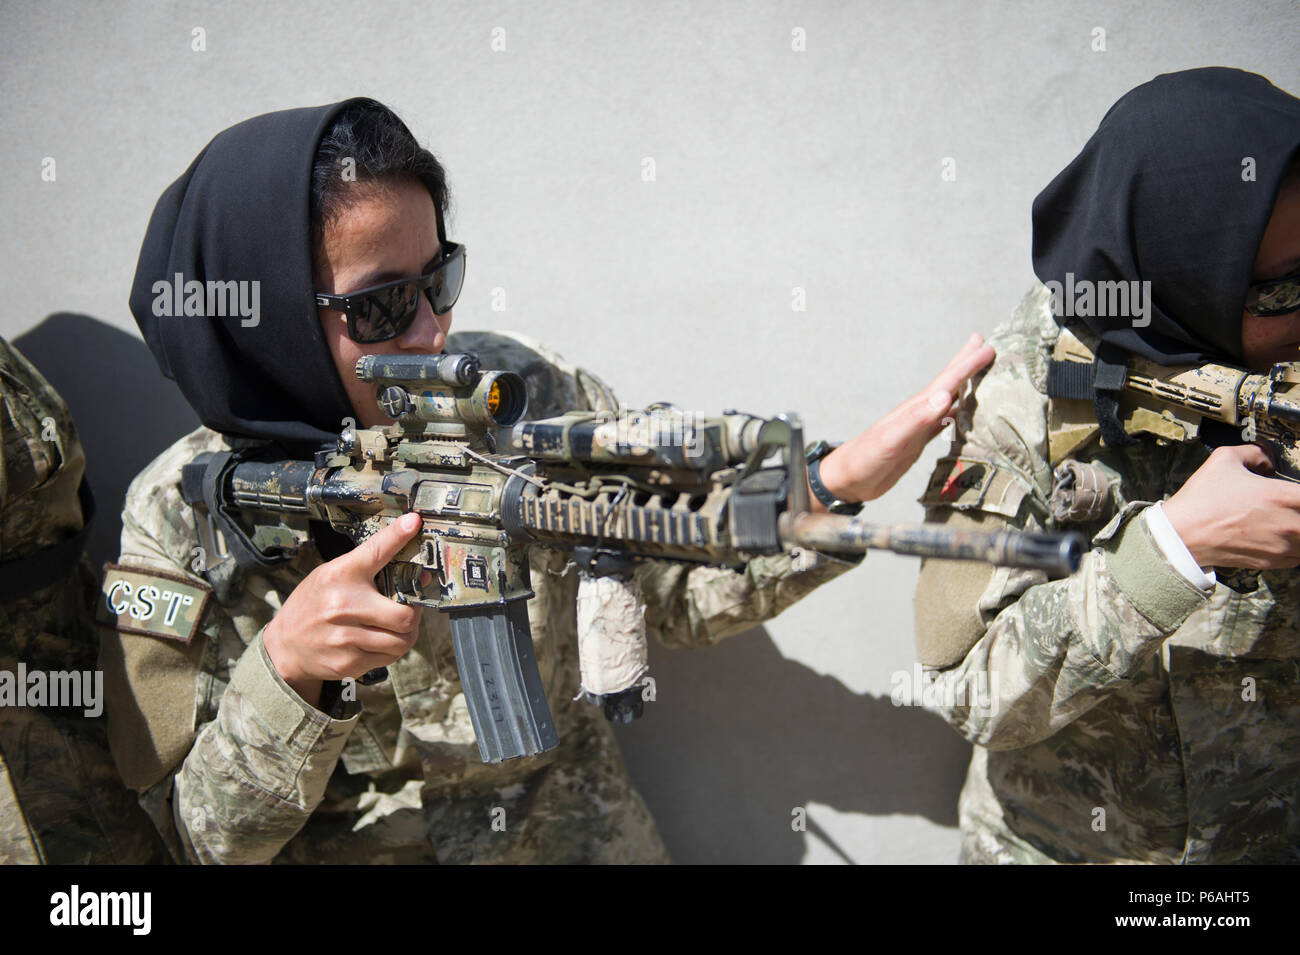 Ktah Khas Afghan Female Tactical Platoon members perform a close quarters battle drill drill outside Kabul, Afghanistan May 29, 2016. The females work closely alongside the males on operations to engage and interact with women and children. The FTPs are trained in marksmanship, language, fast roping and other combat-related skills. (U.S. Air Force photo by Staff Sgt. Douglas Ellis/Released) Stock Photo